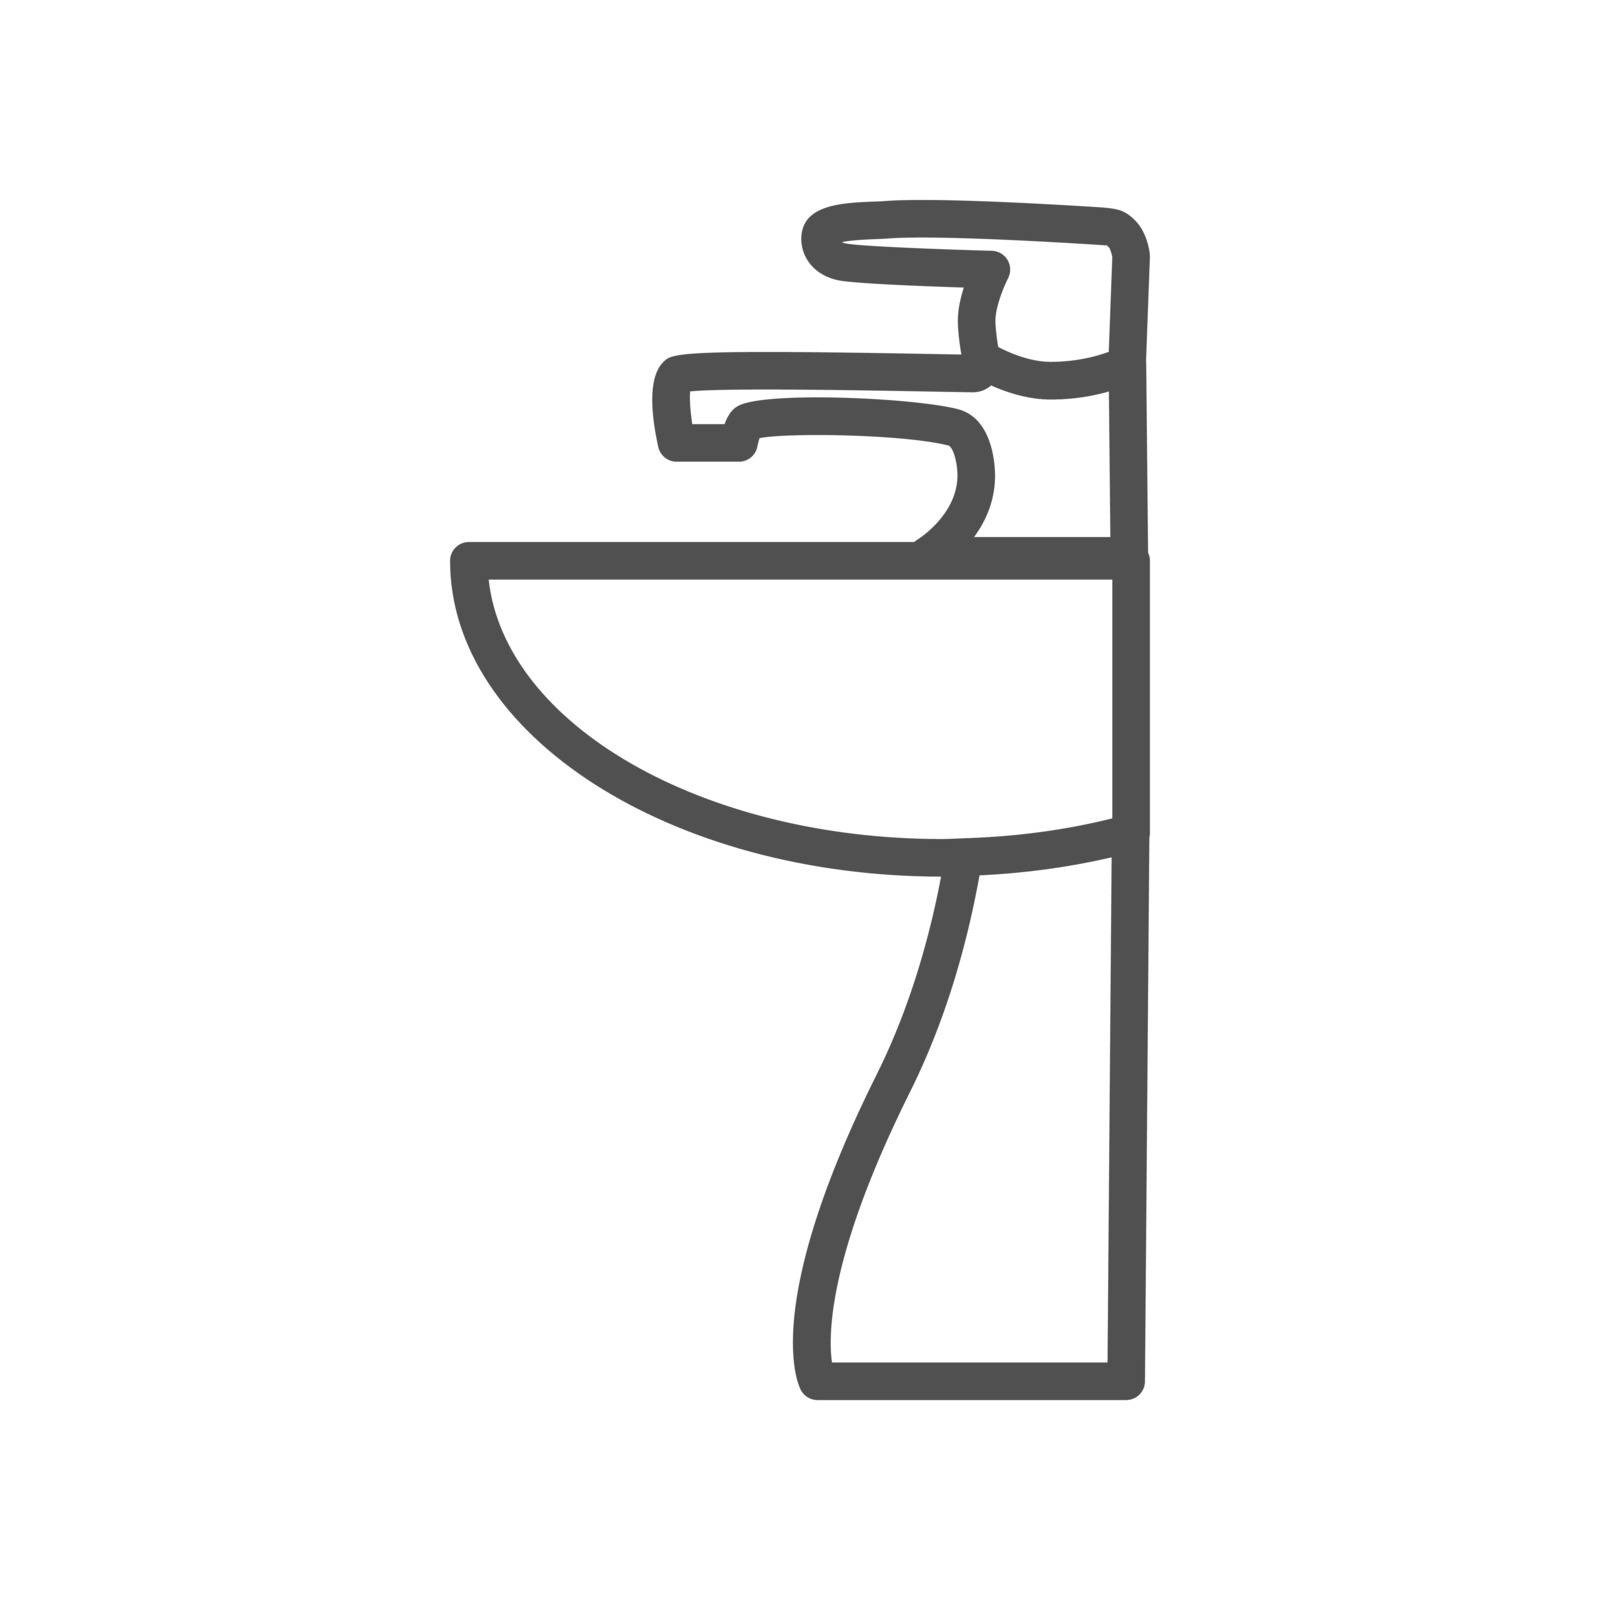 Sink Thin Line Vector Icon Isolated on the White Background.